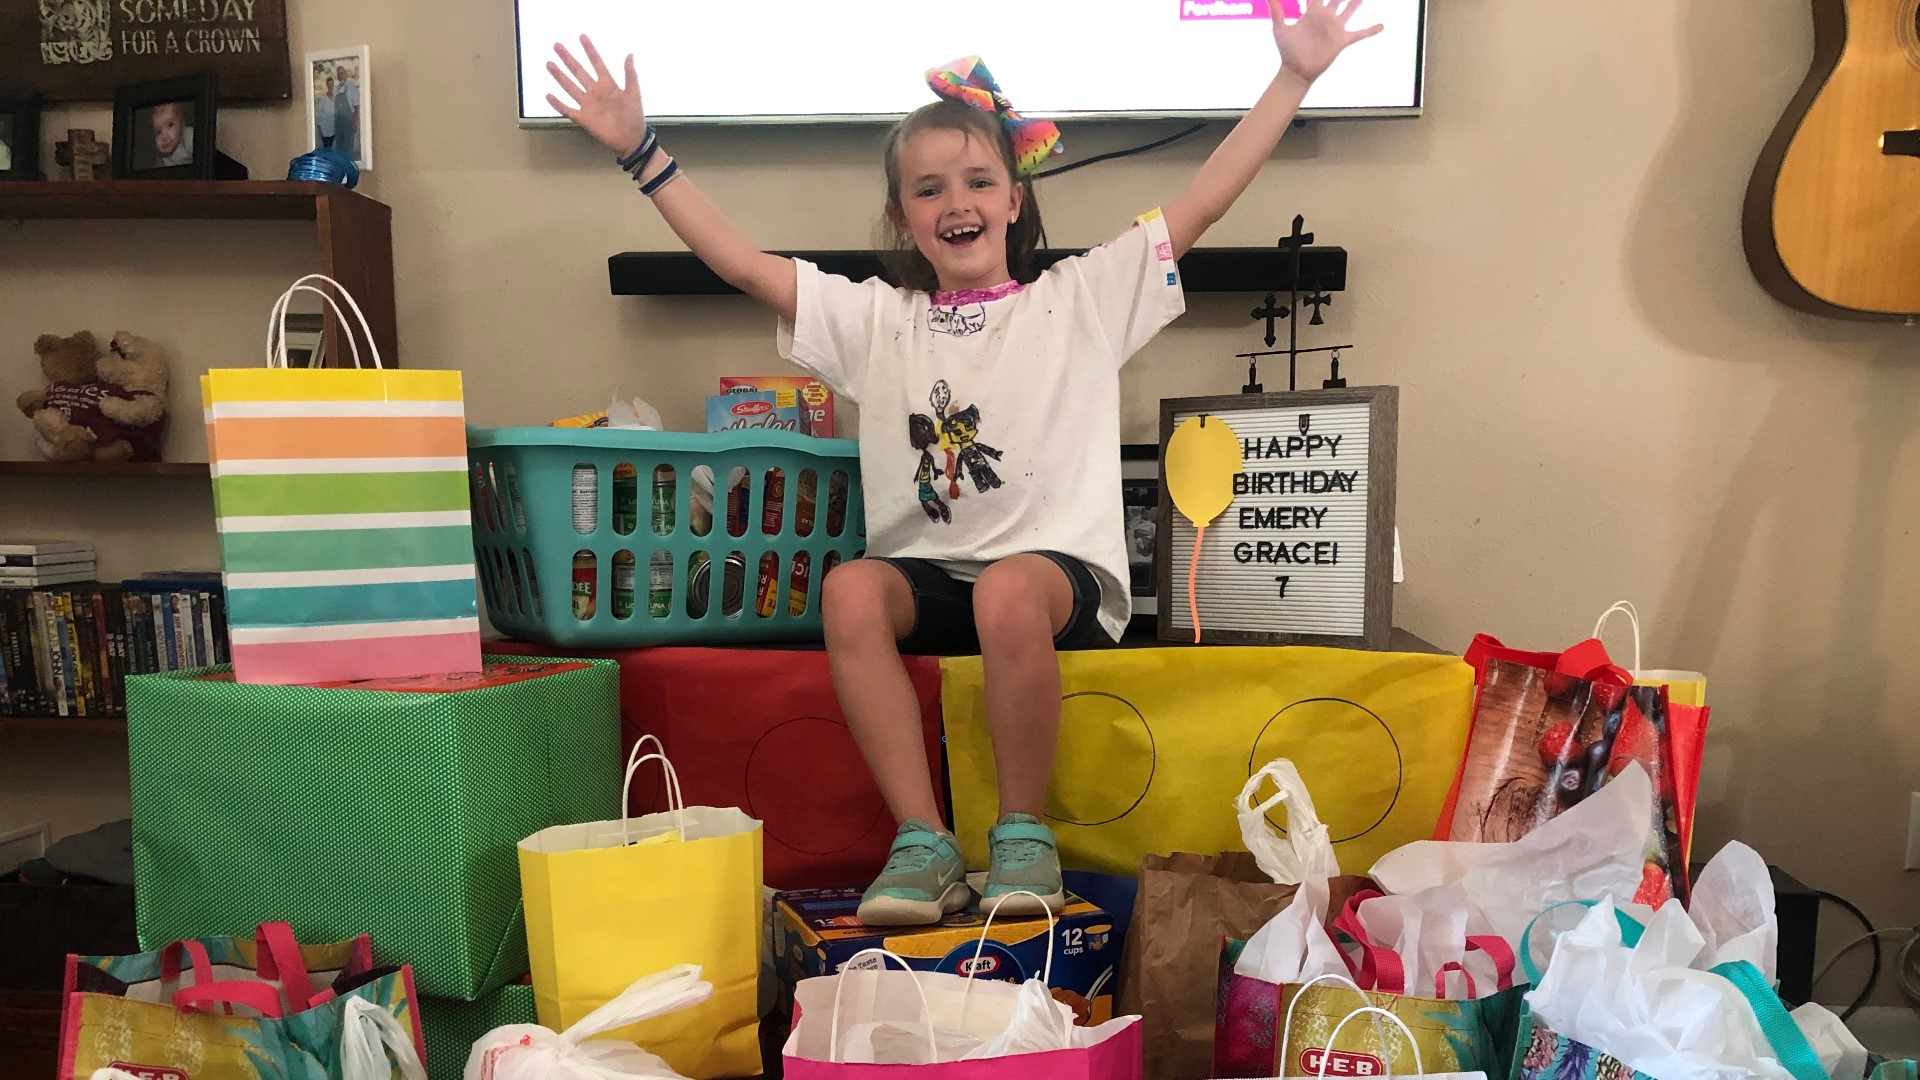 Emery Hobson is turning turning 7 years old, and all she wanted for her birthday this year was non-perishable foods for those less fortunate than her.